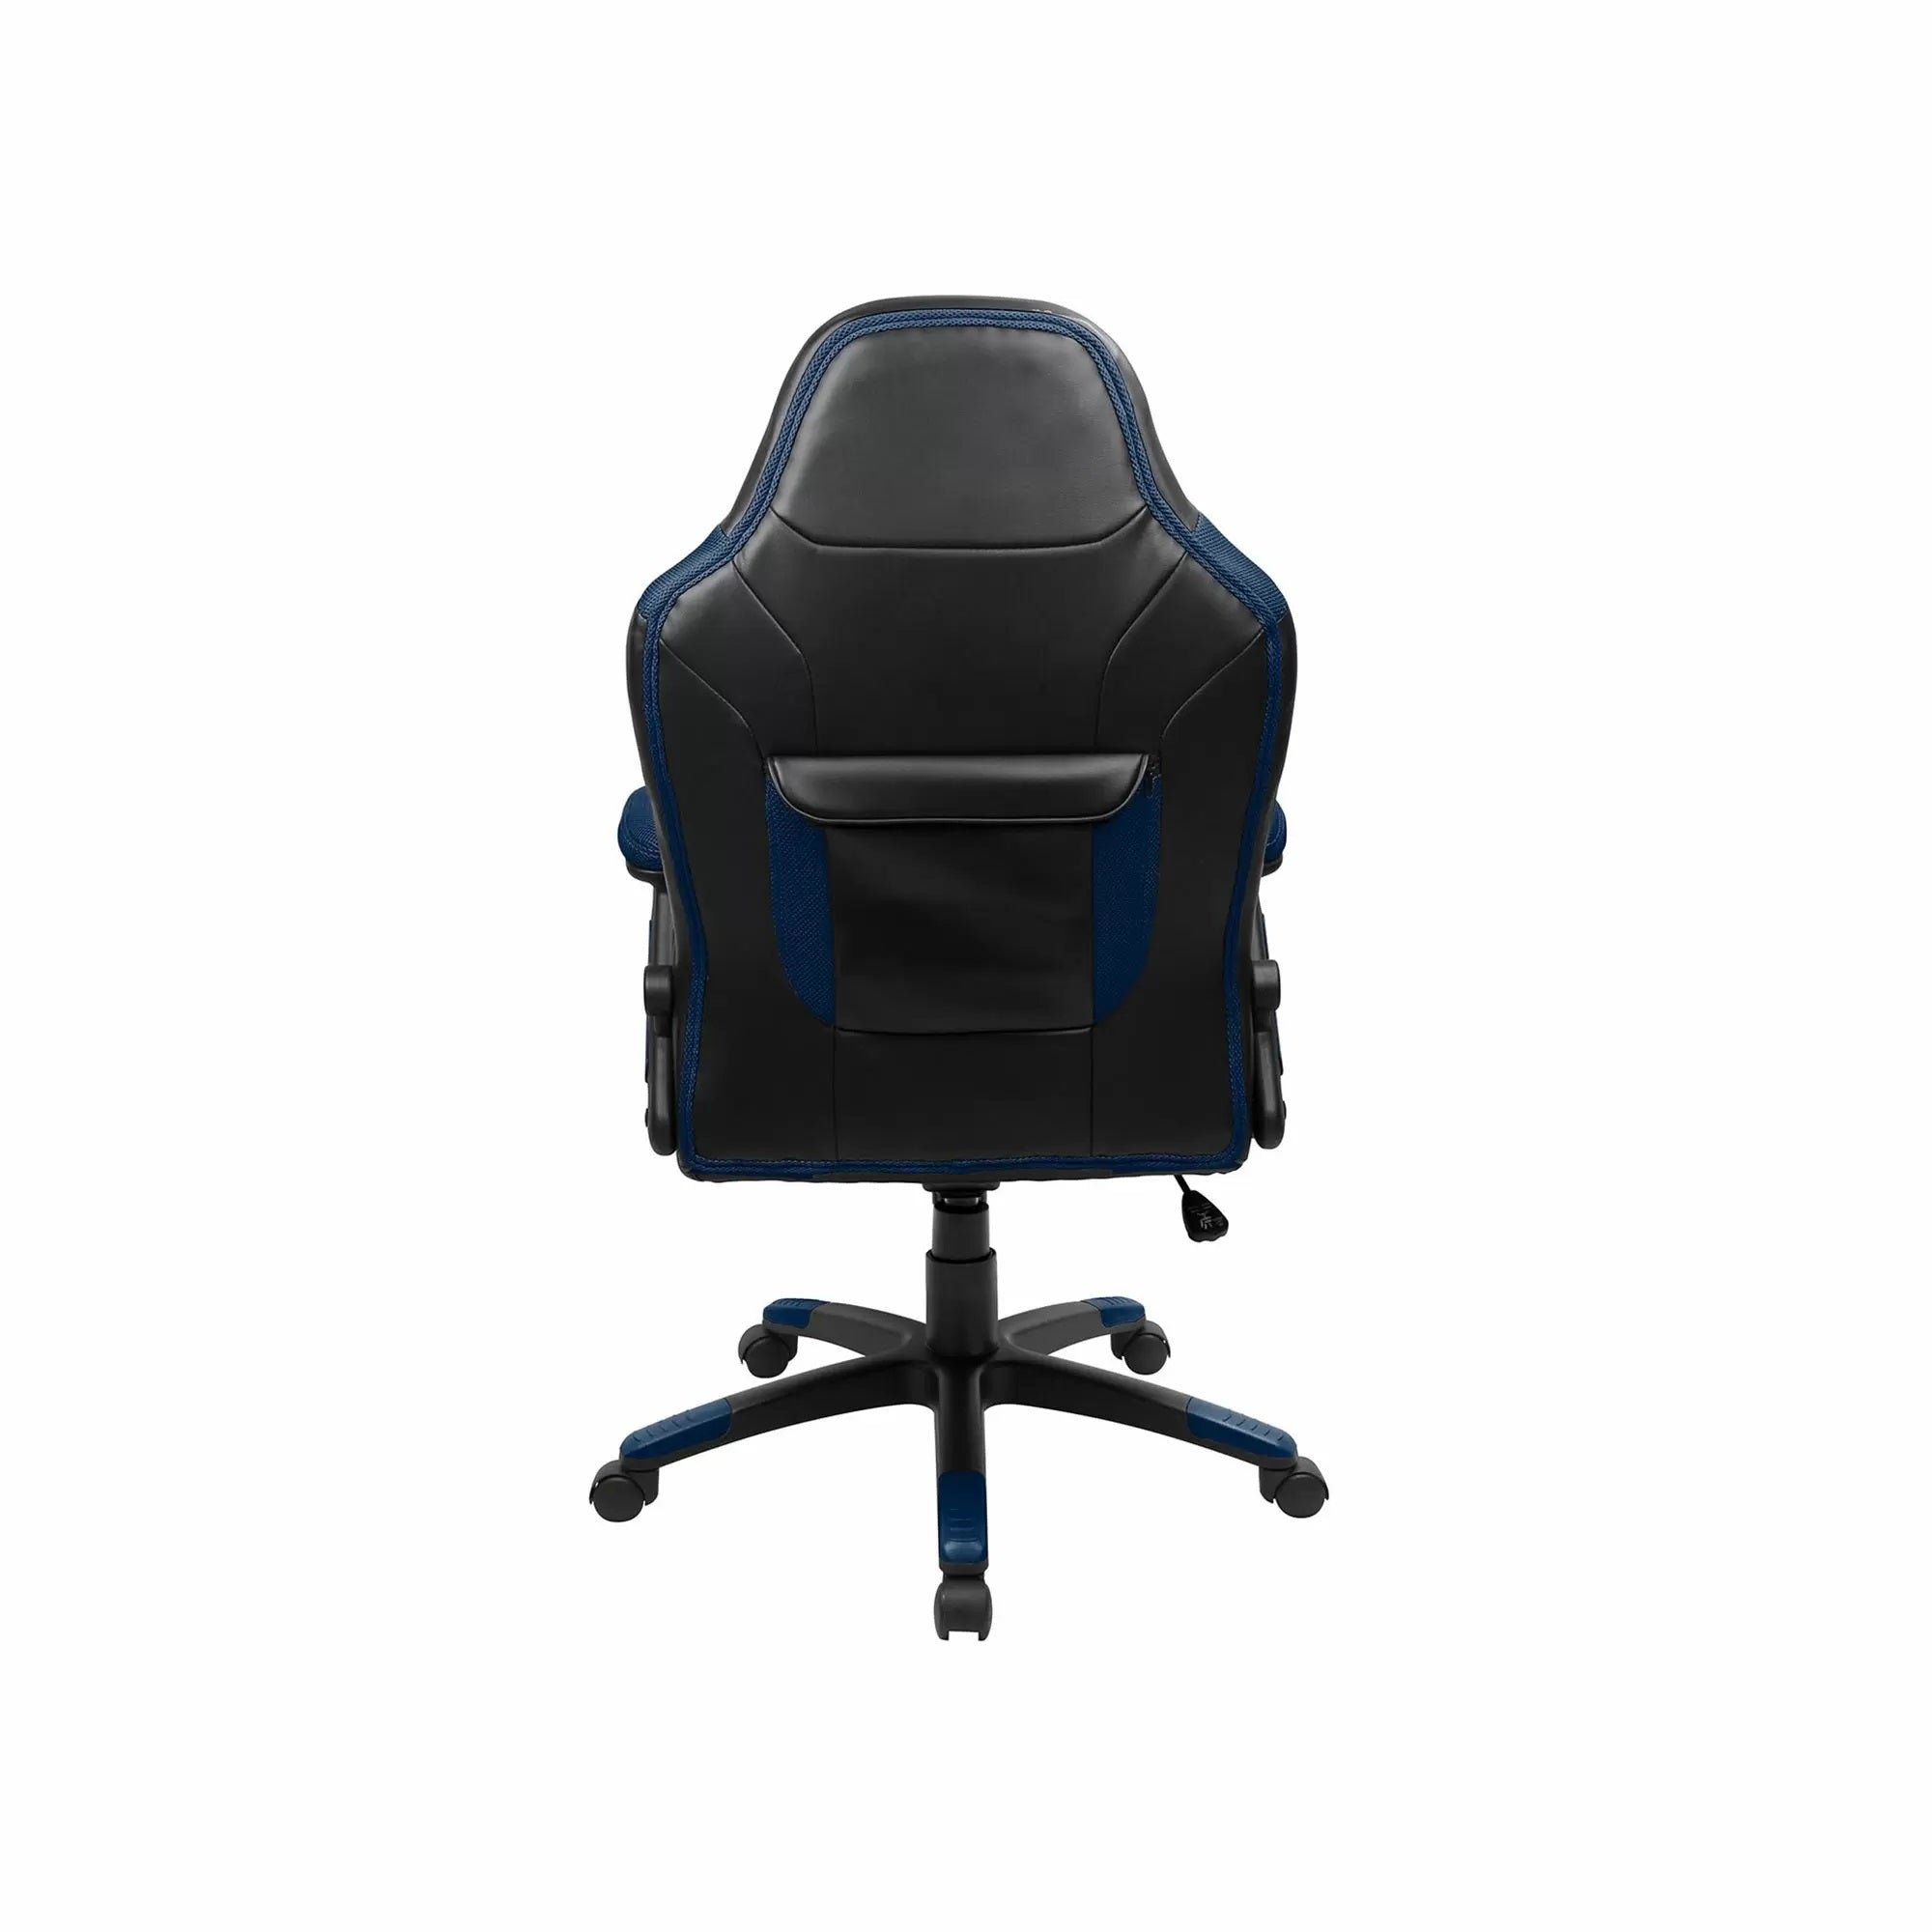 Imperial USA Oversized Video Gaming Chair Black Blue Back